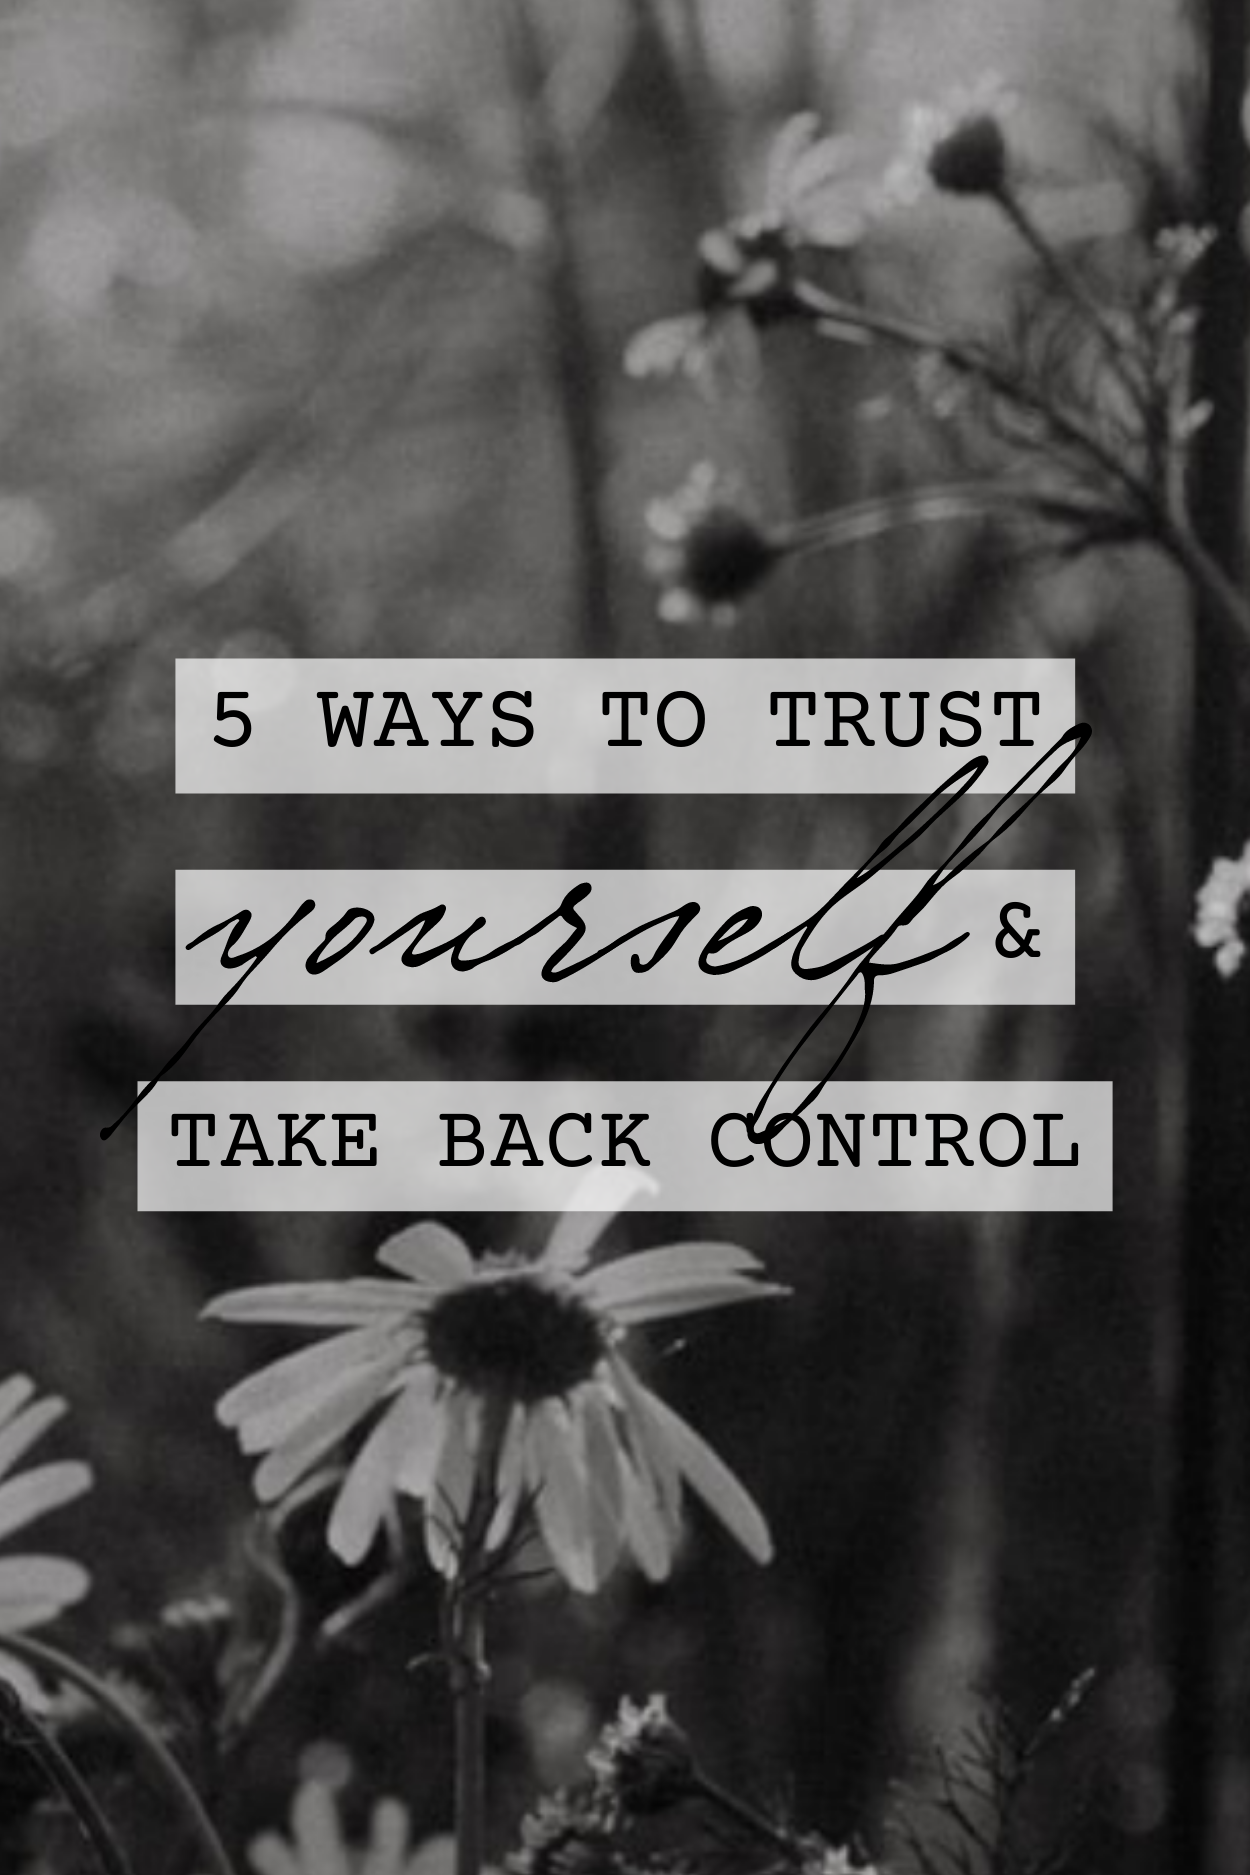 The Self-Help Psychic Podcast: 5 Ways to Trust Yourself and Take Back Control with Tabitha Stitt, Psychic medium, spiritual teacher and reiki healer